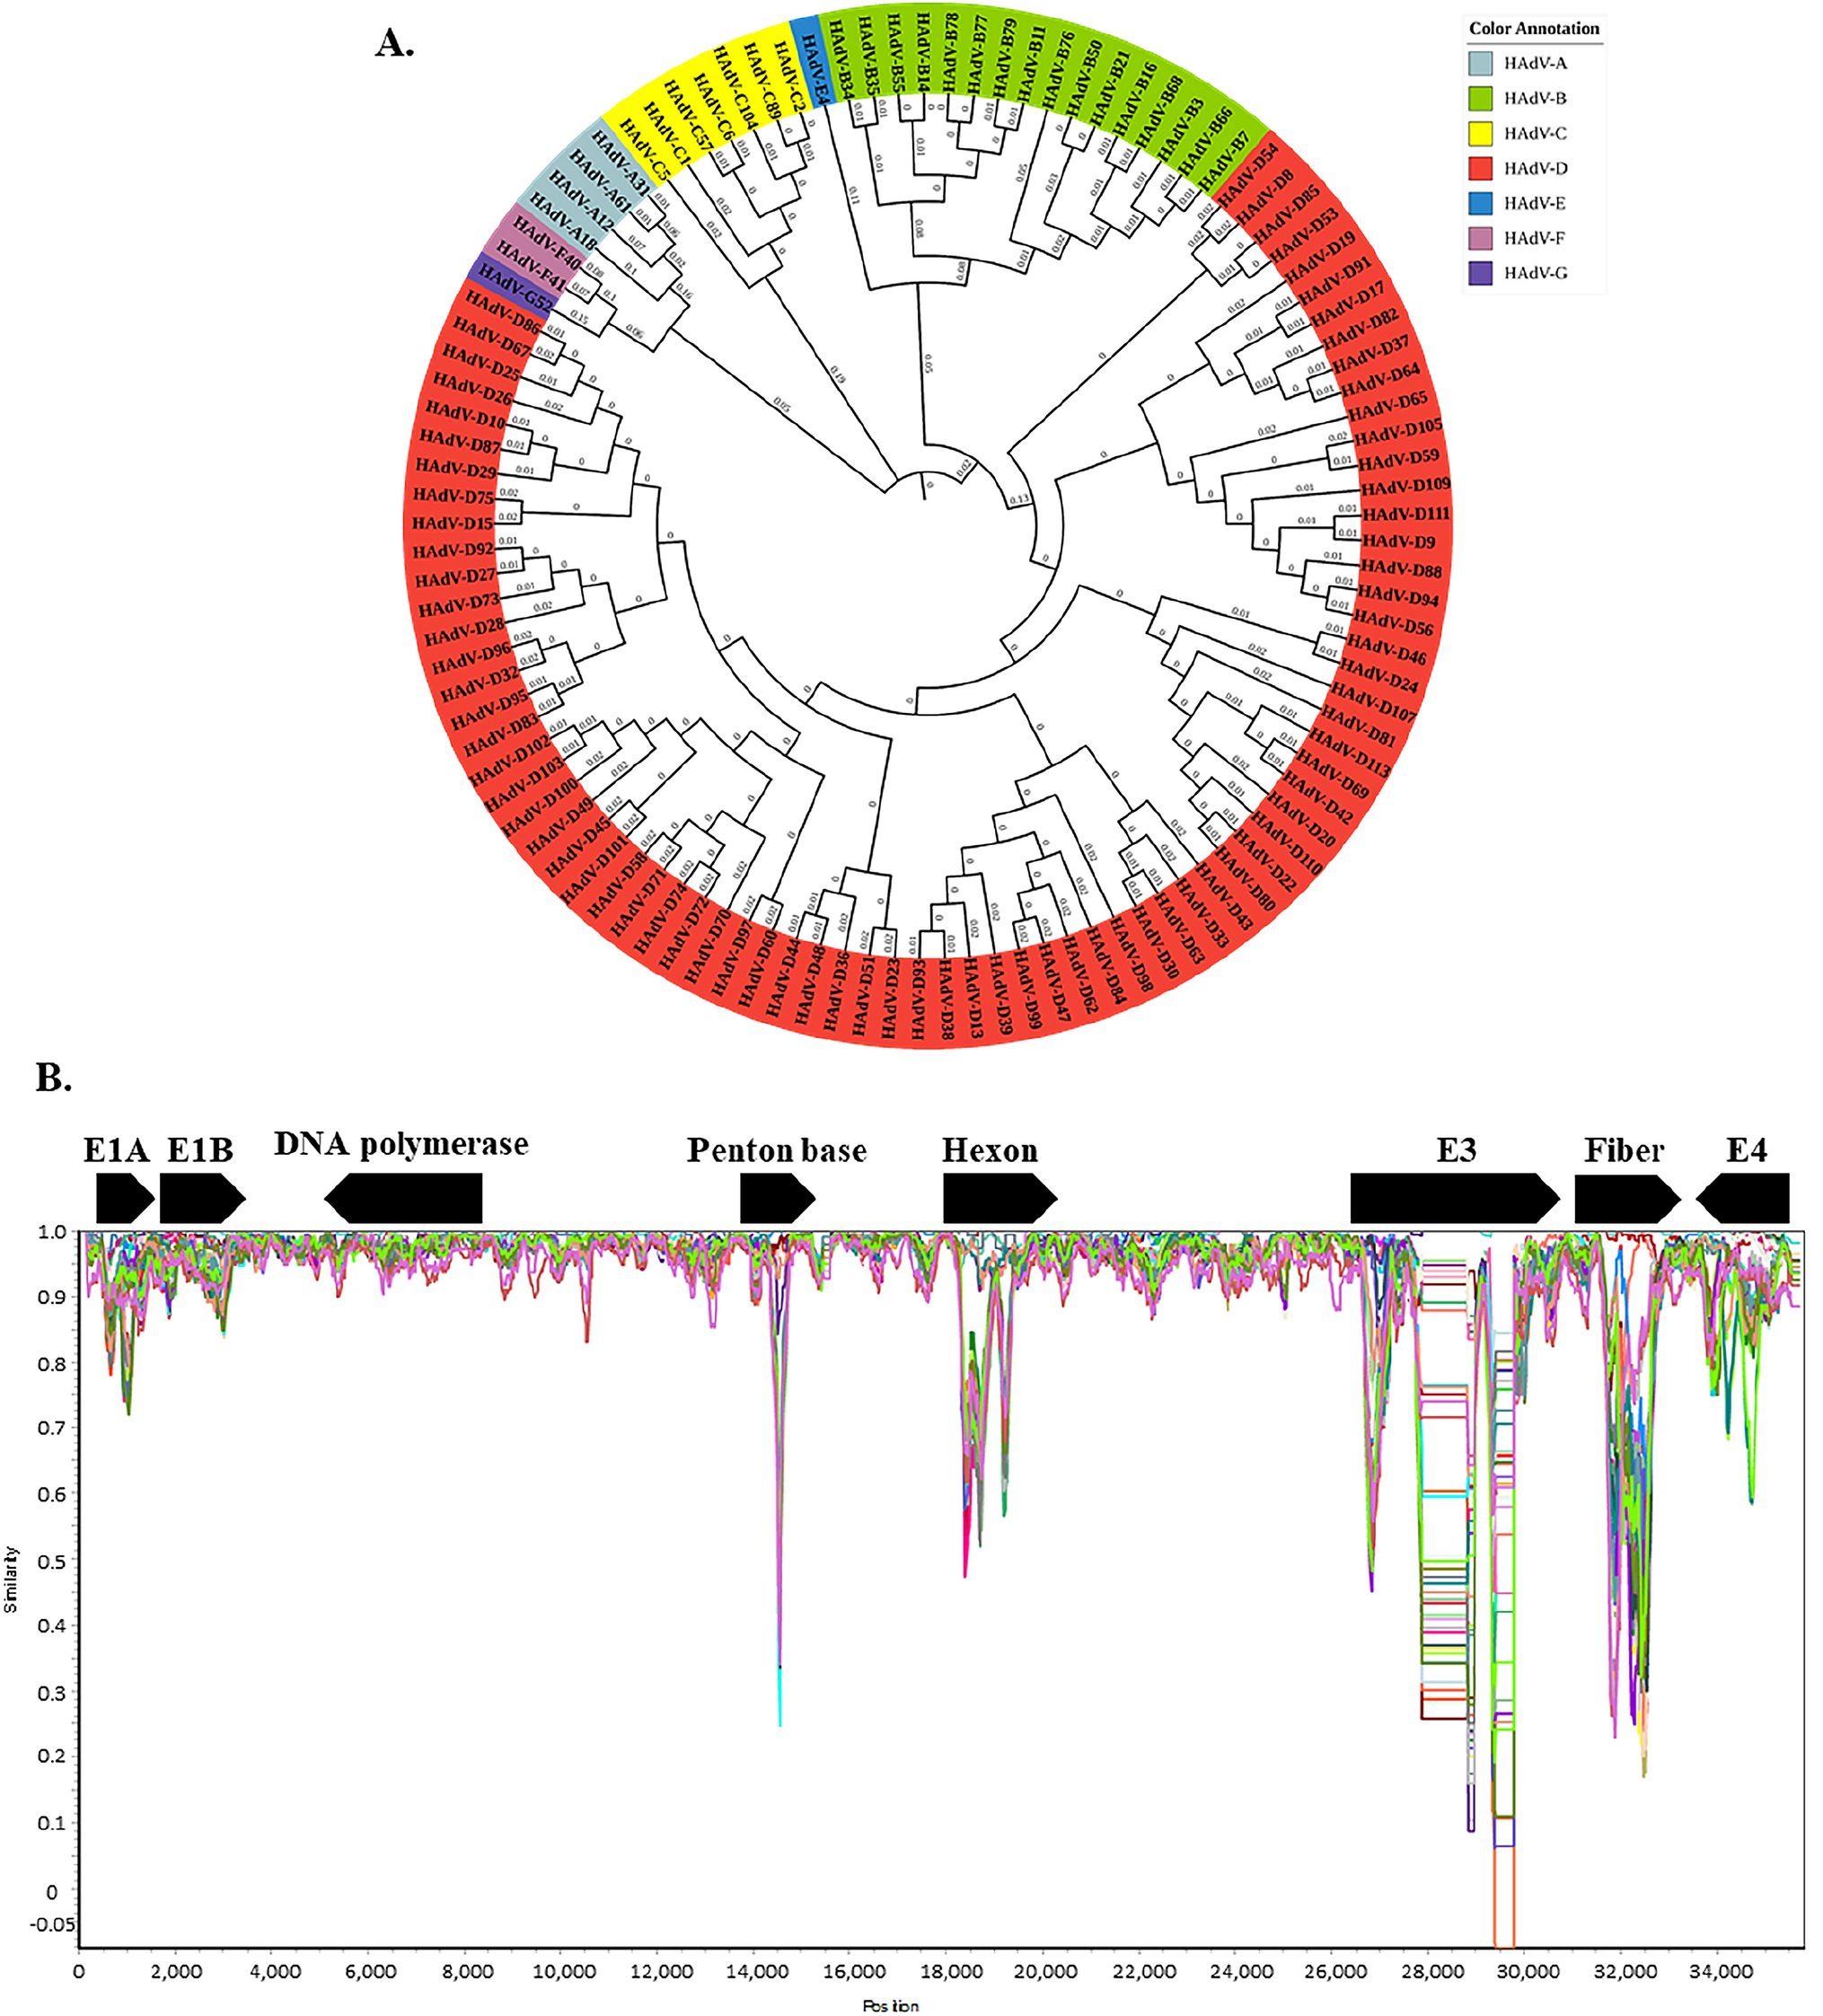 Genomic Evolution and Recombination Dynamics of Human Adenovirus D Species: Insights from Comprehensive Bioinformatic Analysis